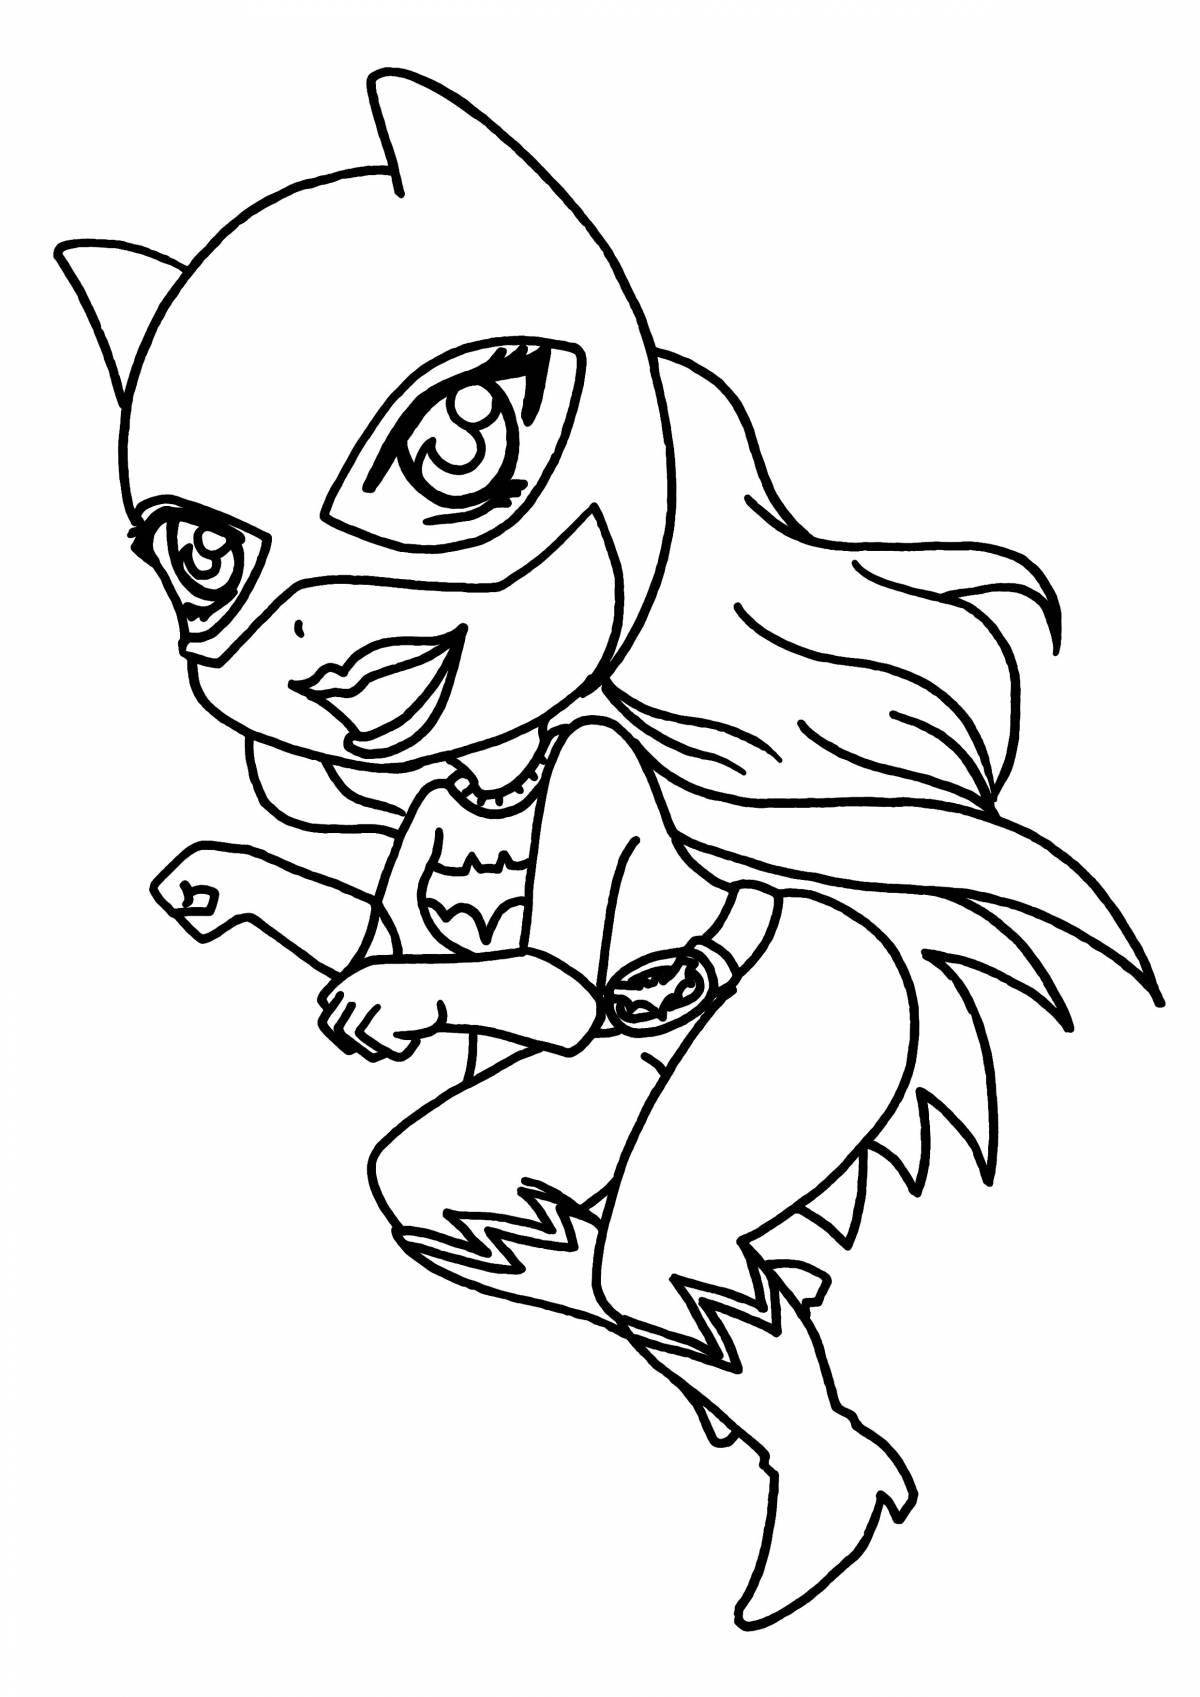 Coloring page cheerful cat lady